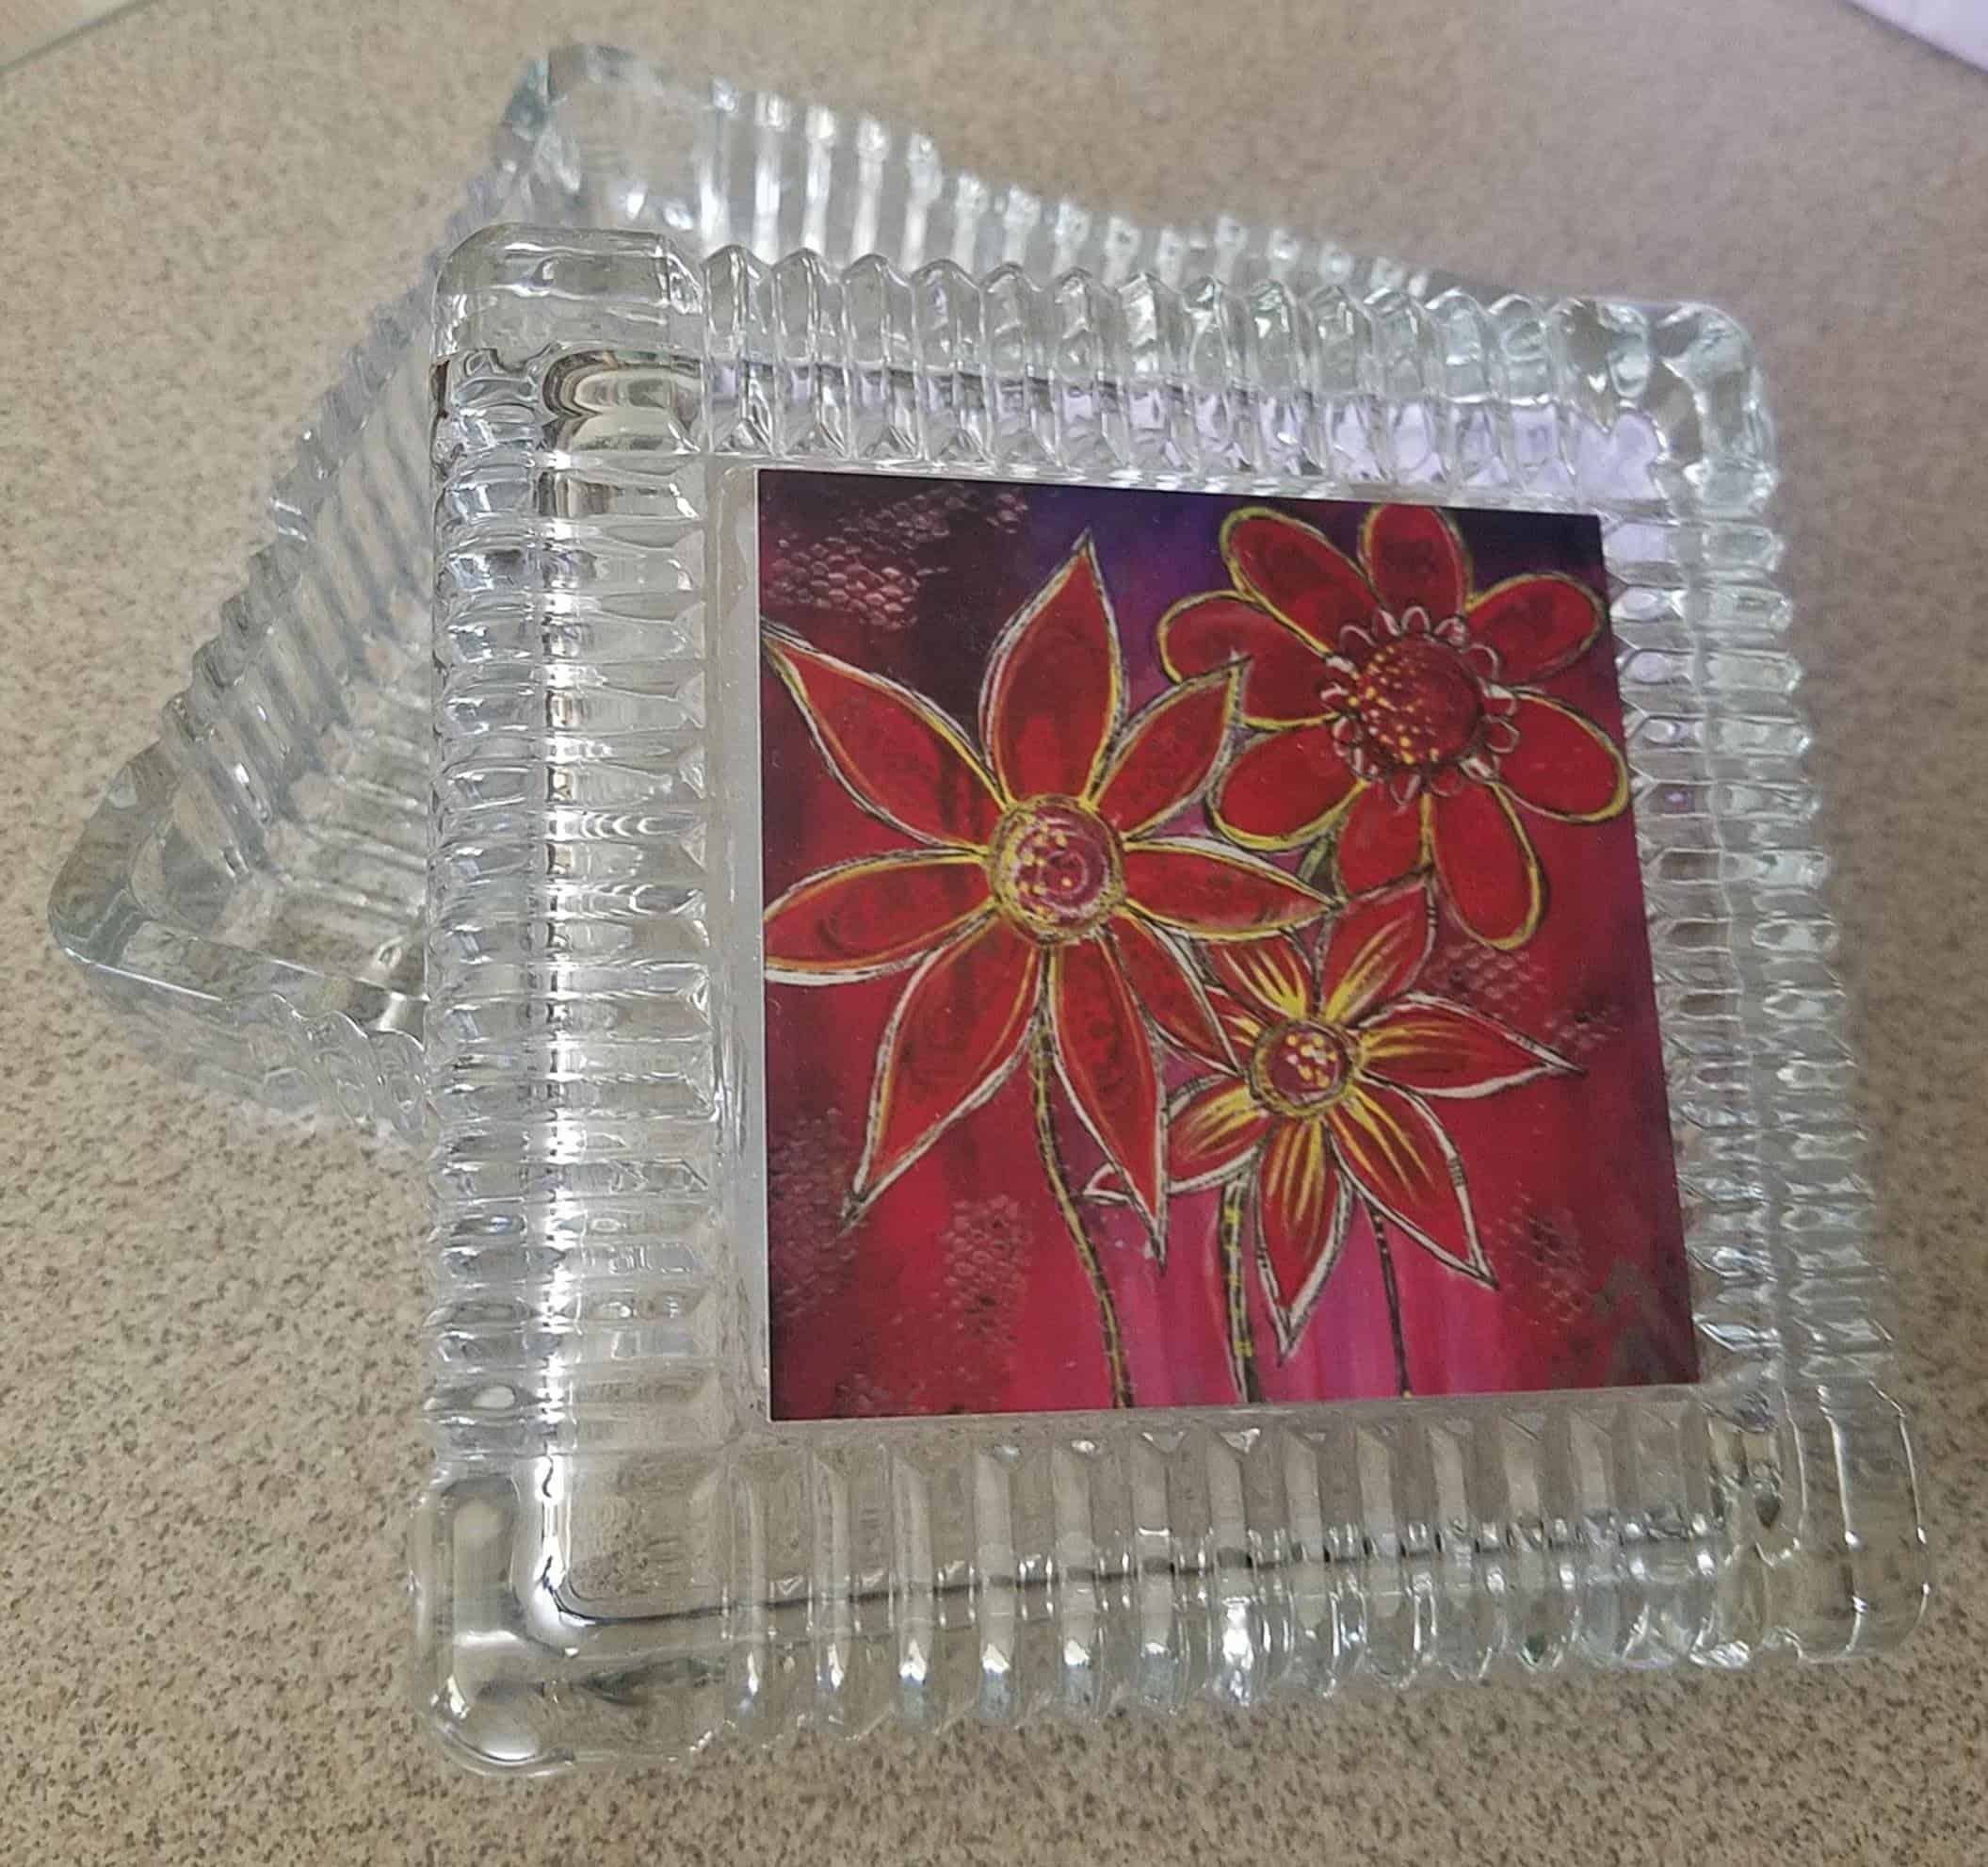 This Red Riot - Glass Trinket Box is made with love by Studio Patty D! Shop more unique gift ideas today with Spots Initiatives, the best way to support creators.